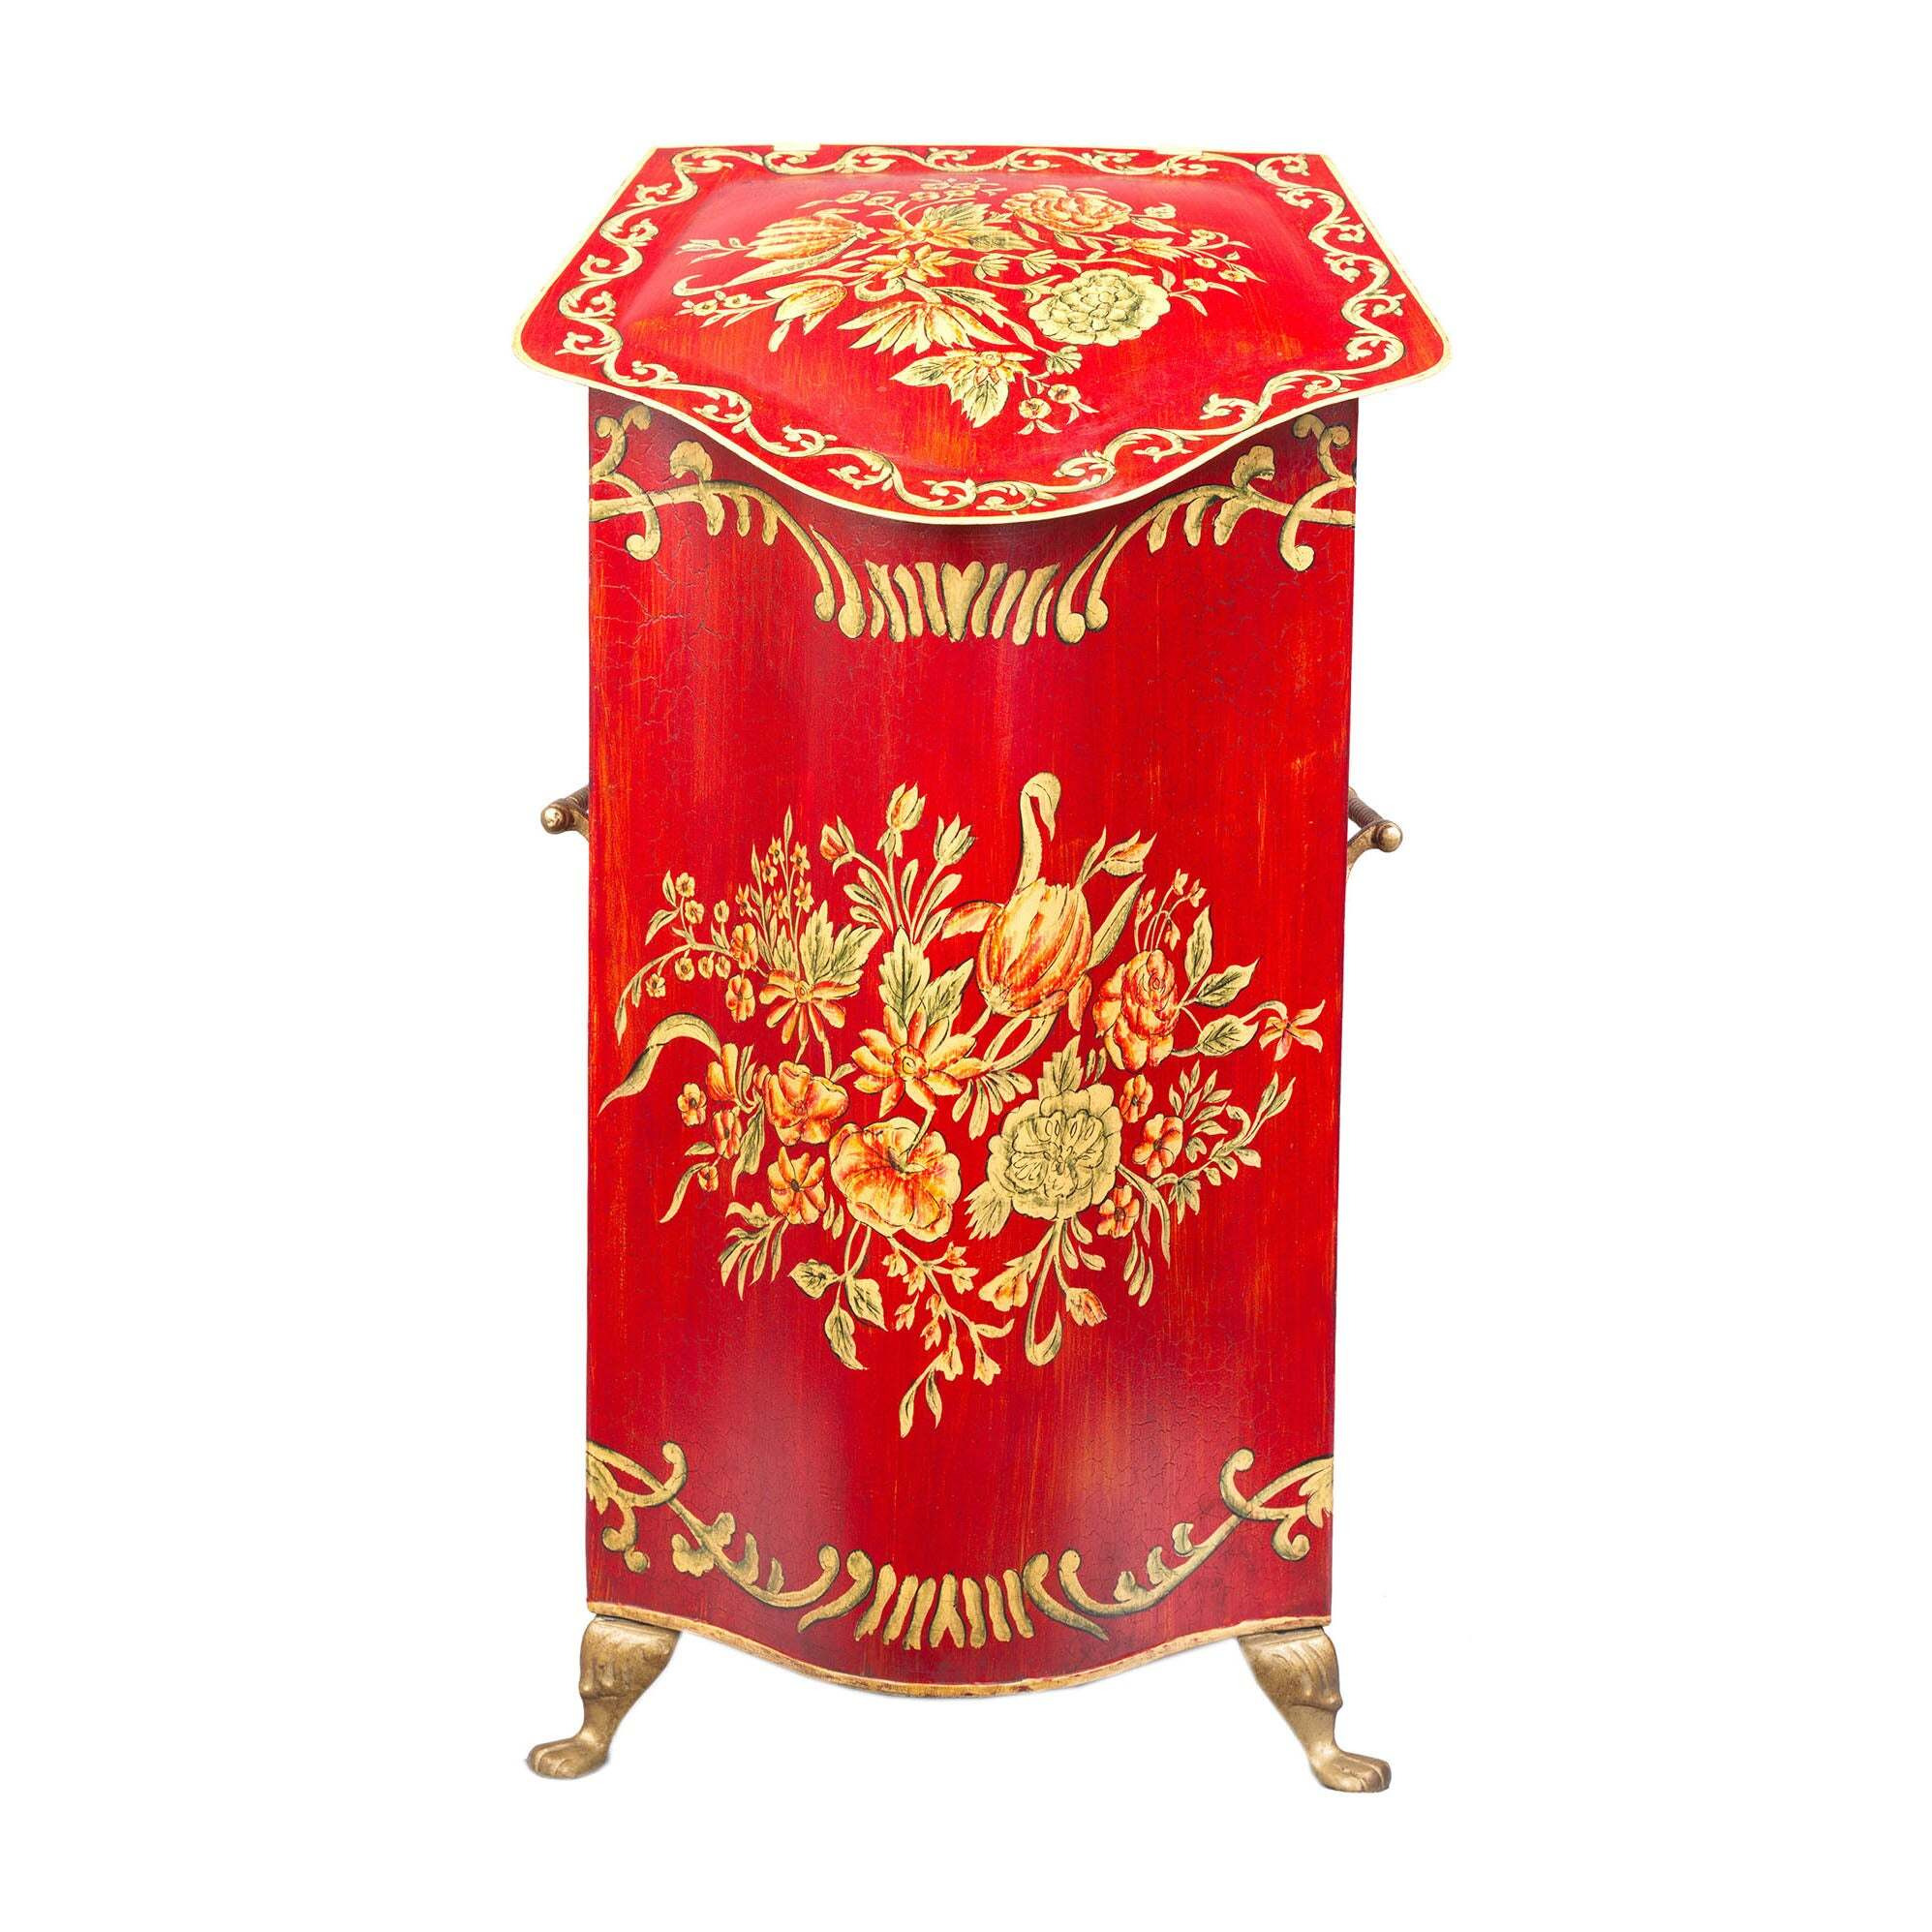 Red Floral Design Tall Decorative Box - image 1